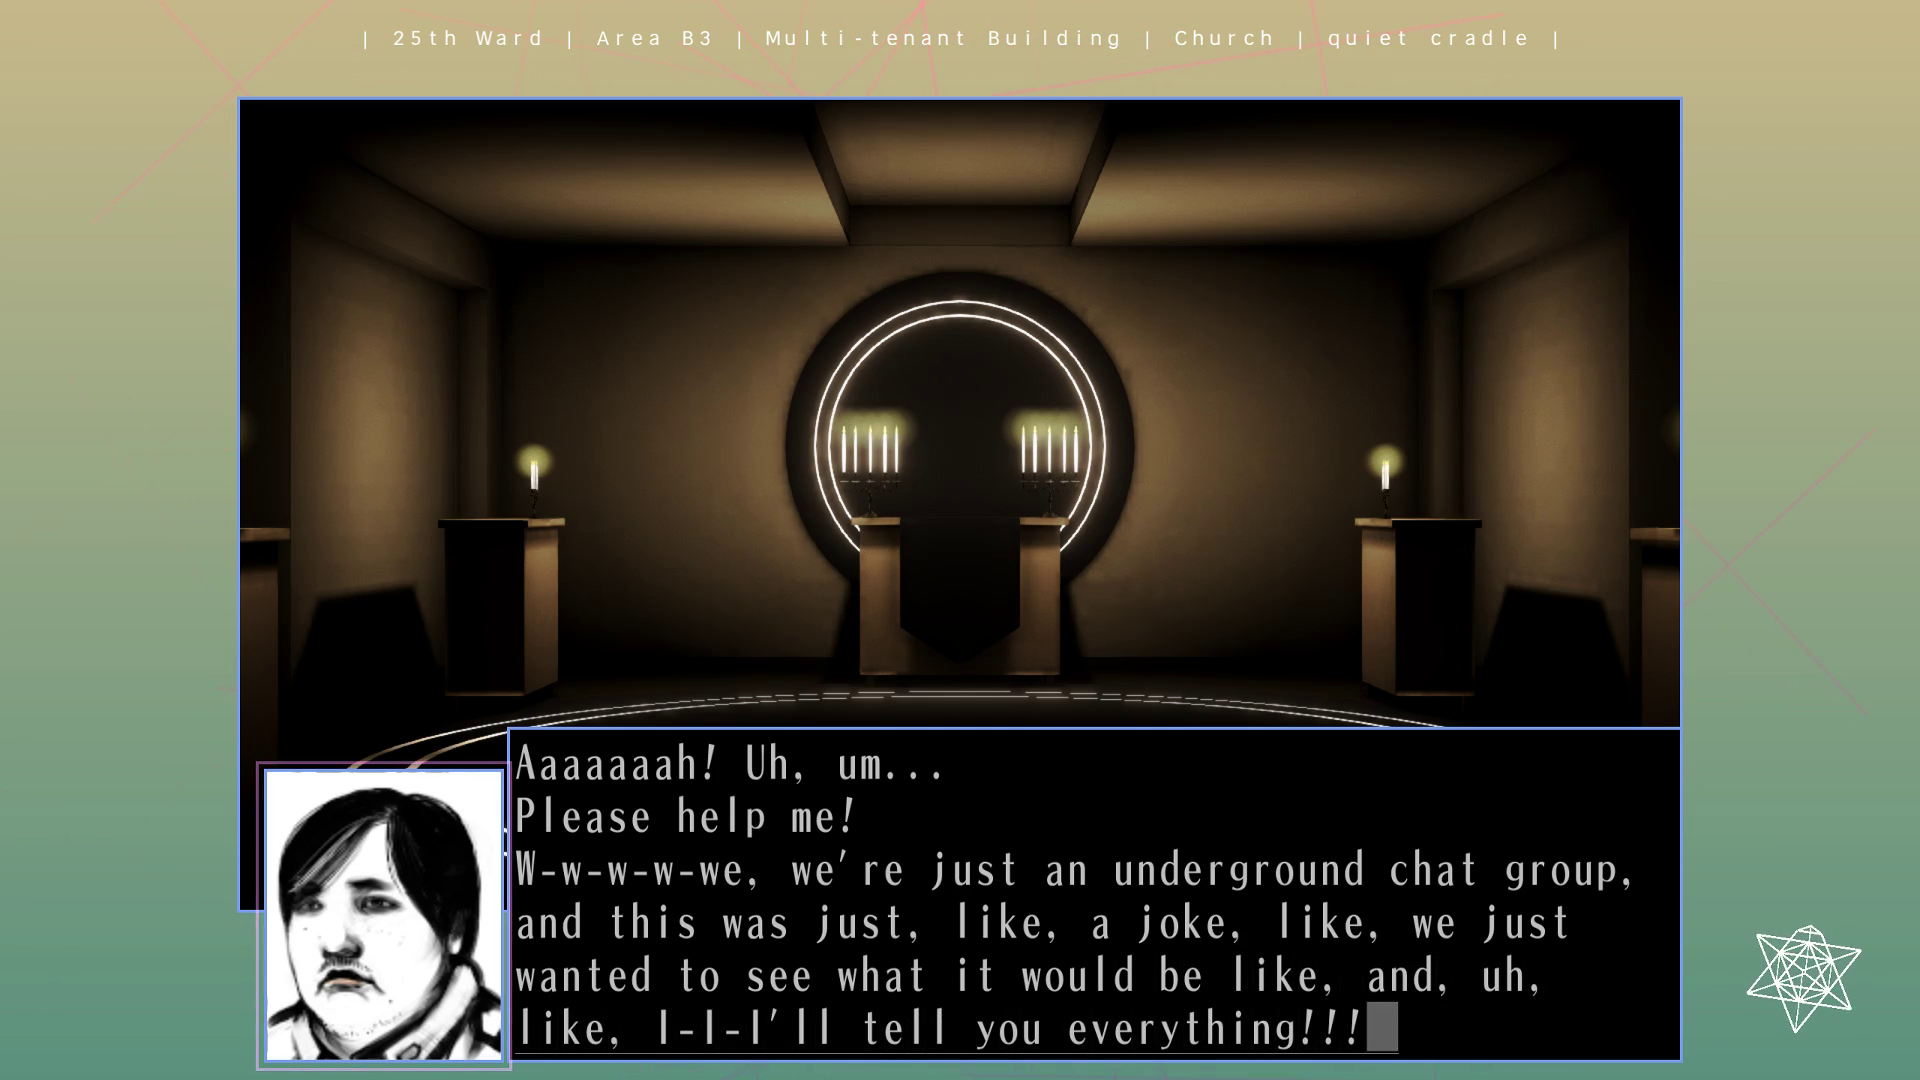 Screenshot from "quiet cradle." In a shrine with several lit candles, Engawa says, "Aaaaaaah! Uh, um... Please help me! W-w-w-w-we, we're just an underground chat group, and this was just, like, a joke, like, we just wanted to see what it would be like, and, uh, like, I-I-I'll tell you everything!!!"